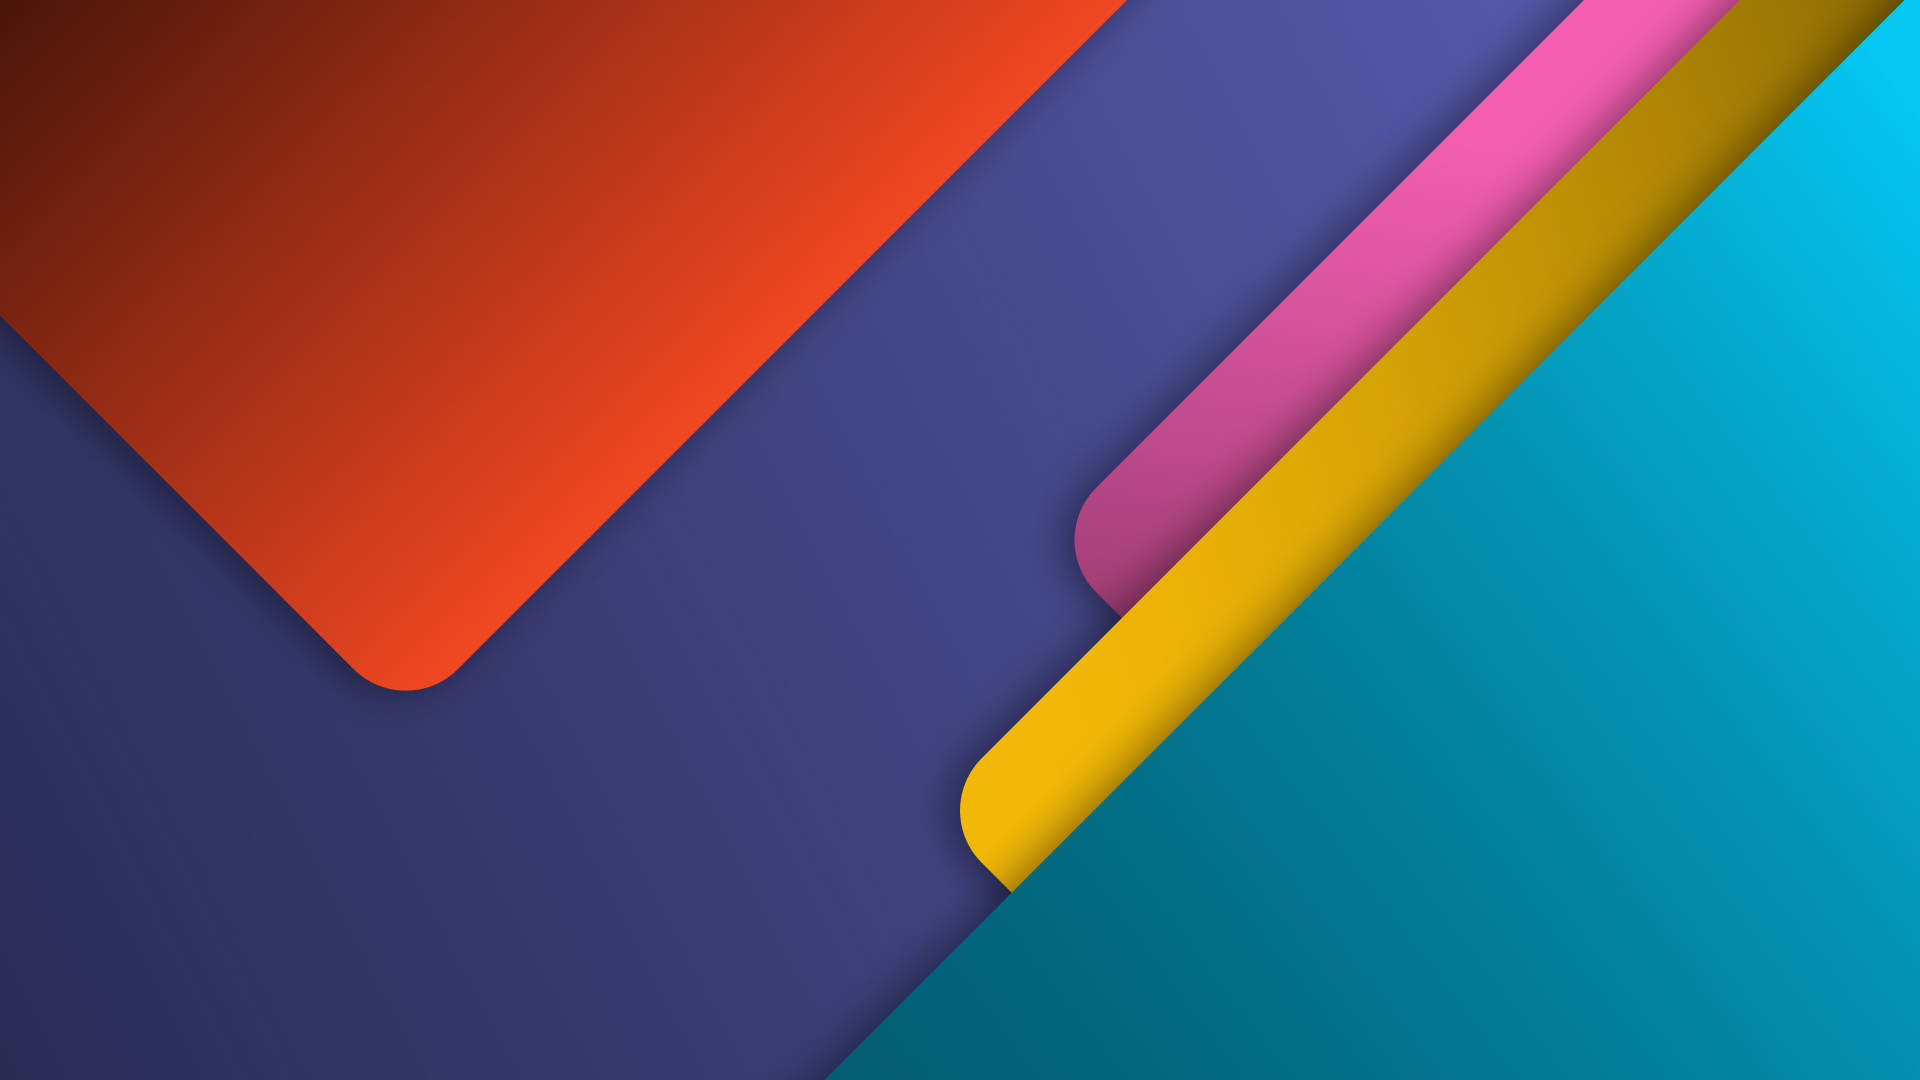 Rounded Rectangles Material Design Wallpaper